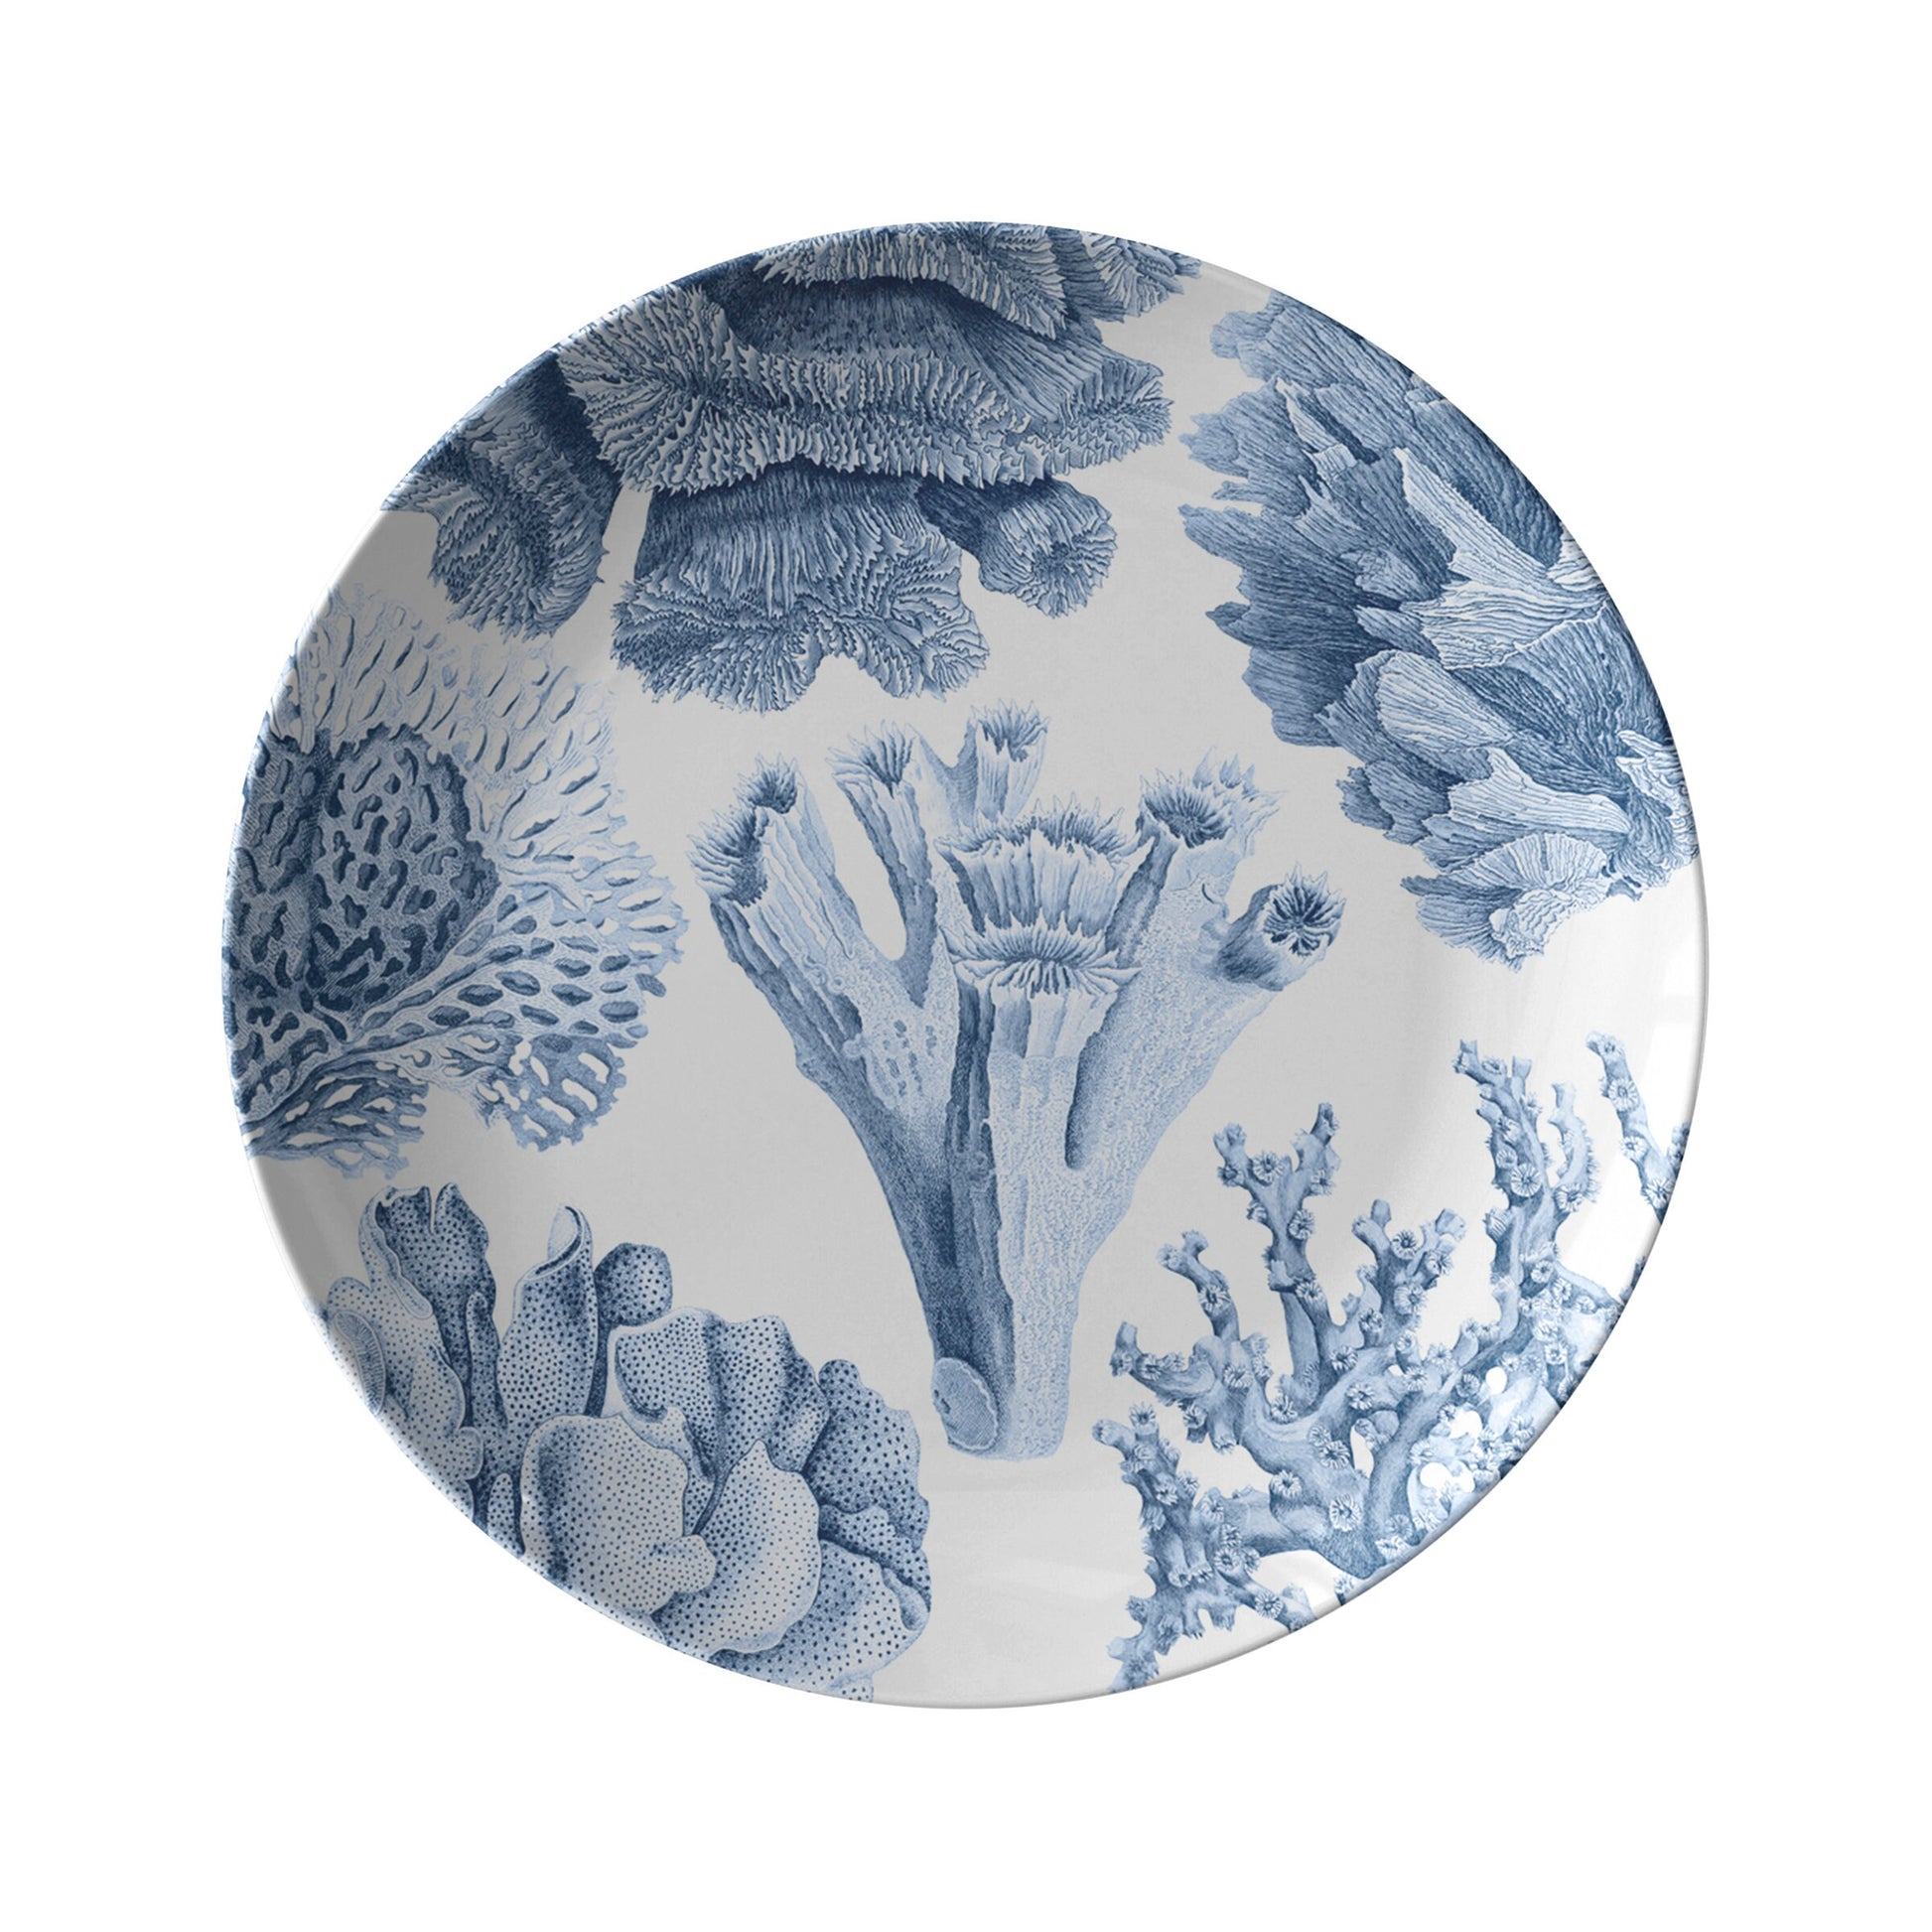 Blue and White Ocean Coral Print Plate Set